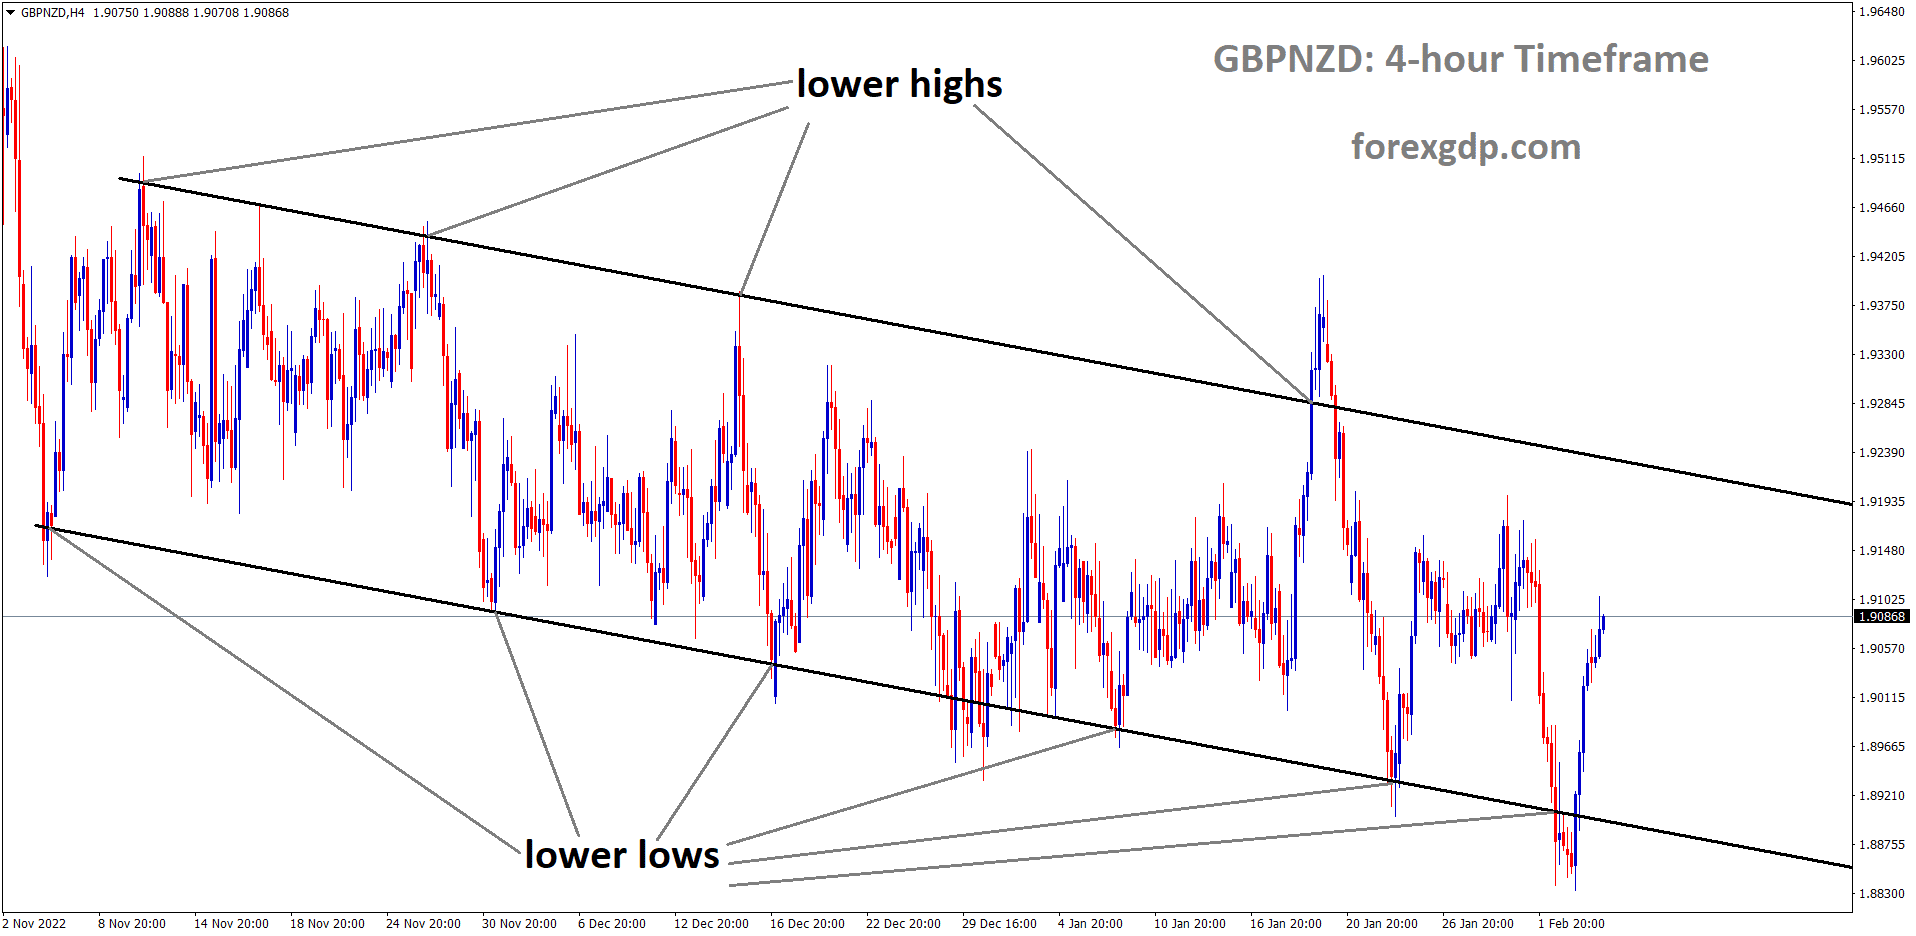 GBPNZD is moving in Descending Channel and the market has rebounded from the lower low area of the channel.